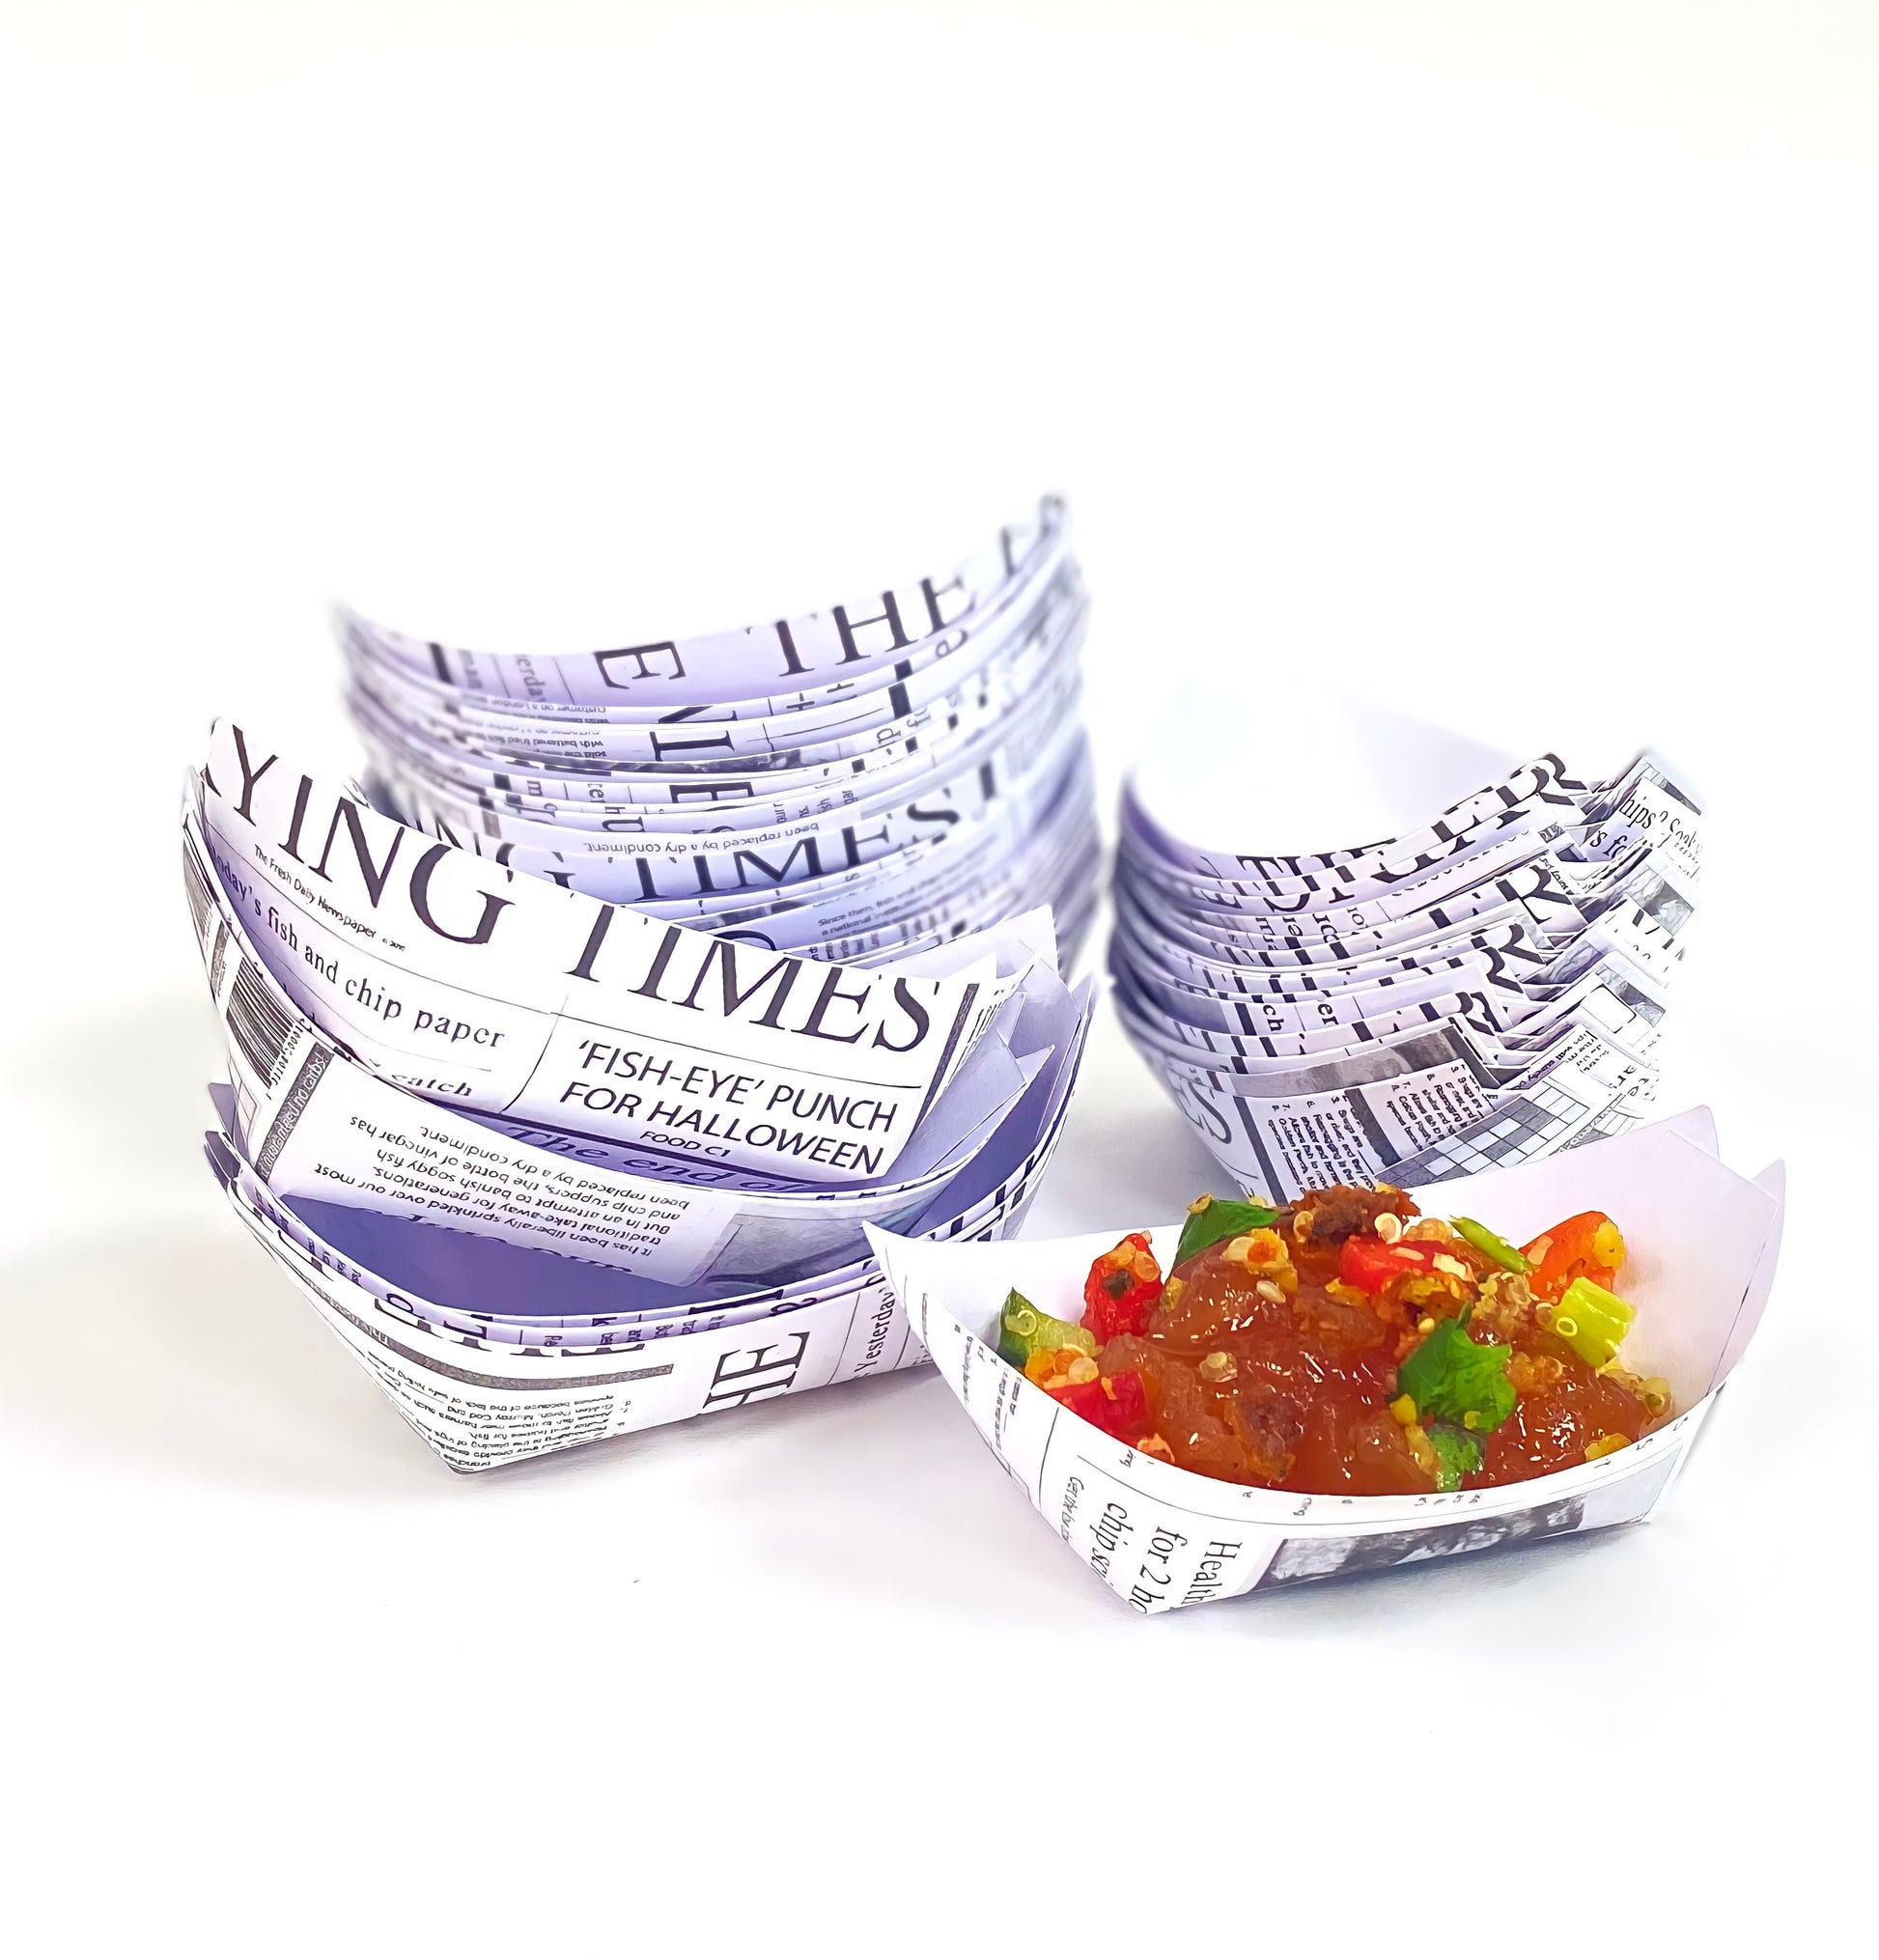 Newspaper Printed Paper Serving Boat/Bowl (9 x 5cm) - Canape King